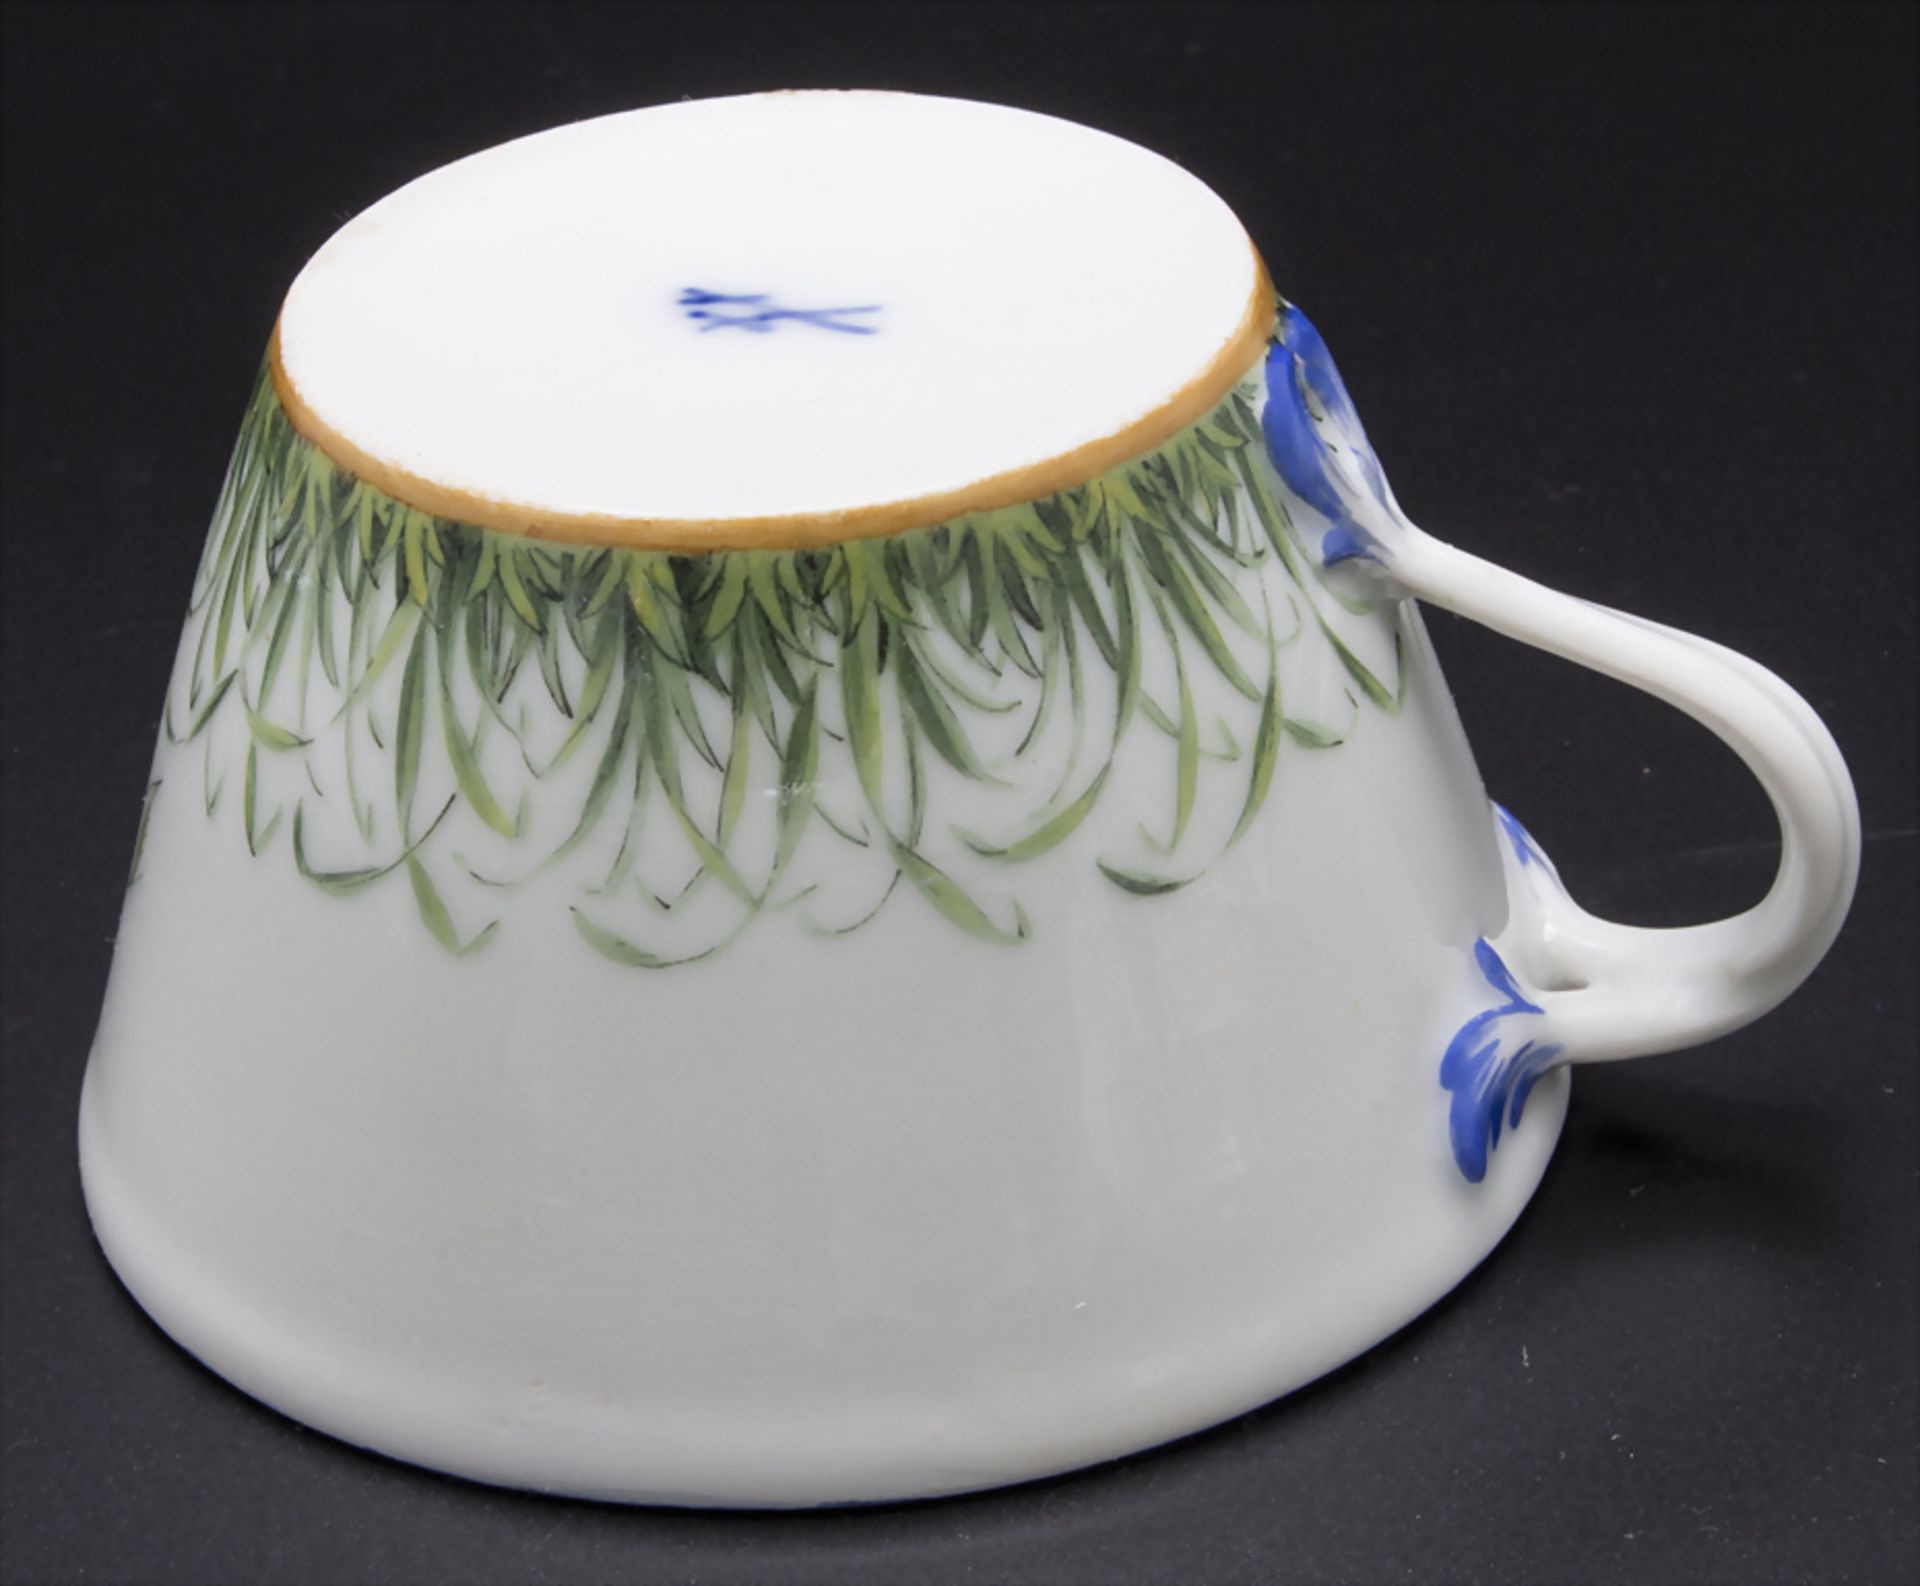 Tasse und UT mit Monogramm / A cup with saucer with monogram, Meissen, Anfang 19. Jh. - Image 14 of 18